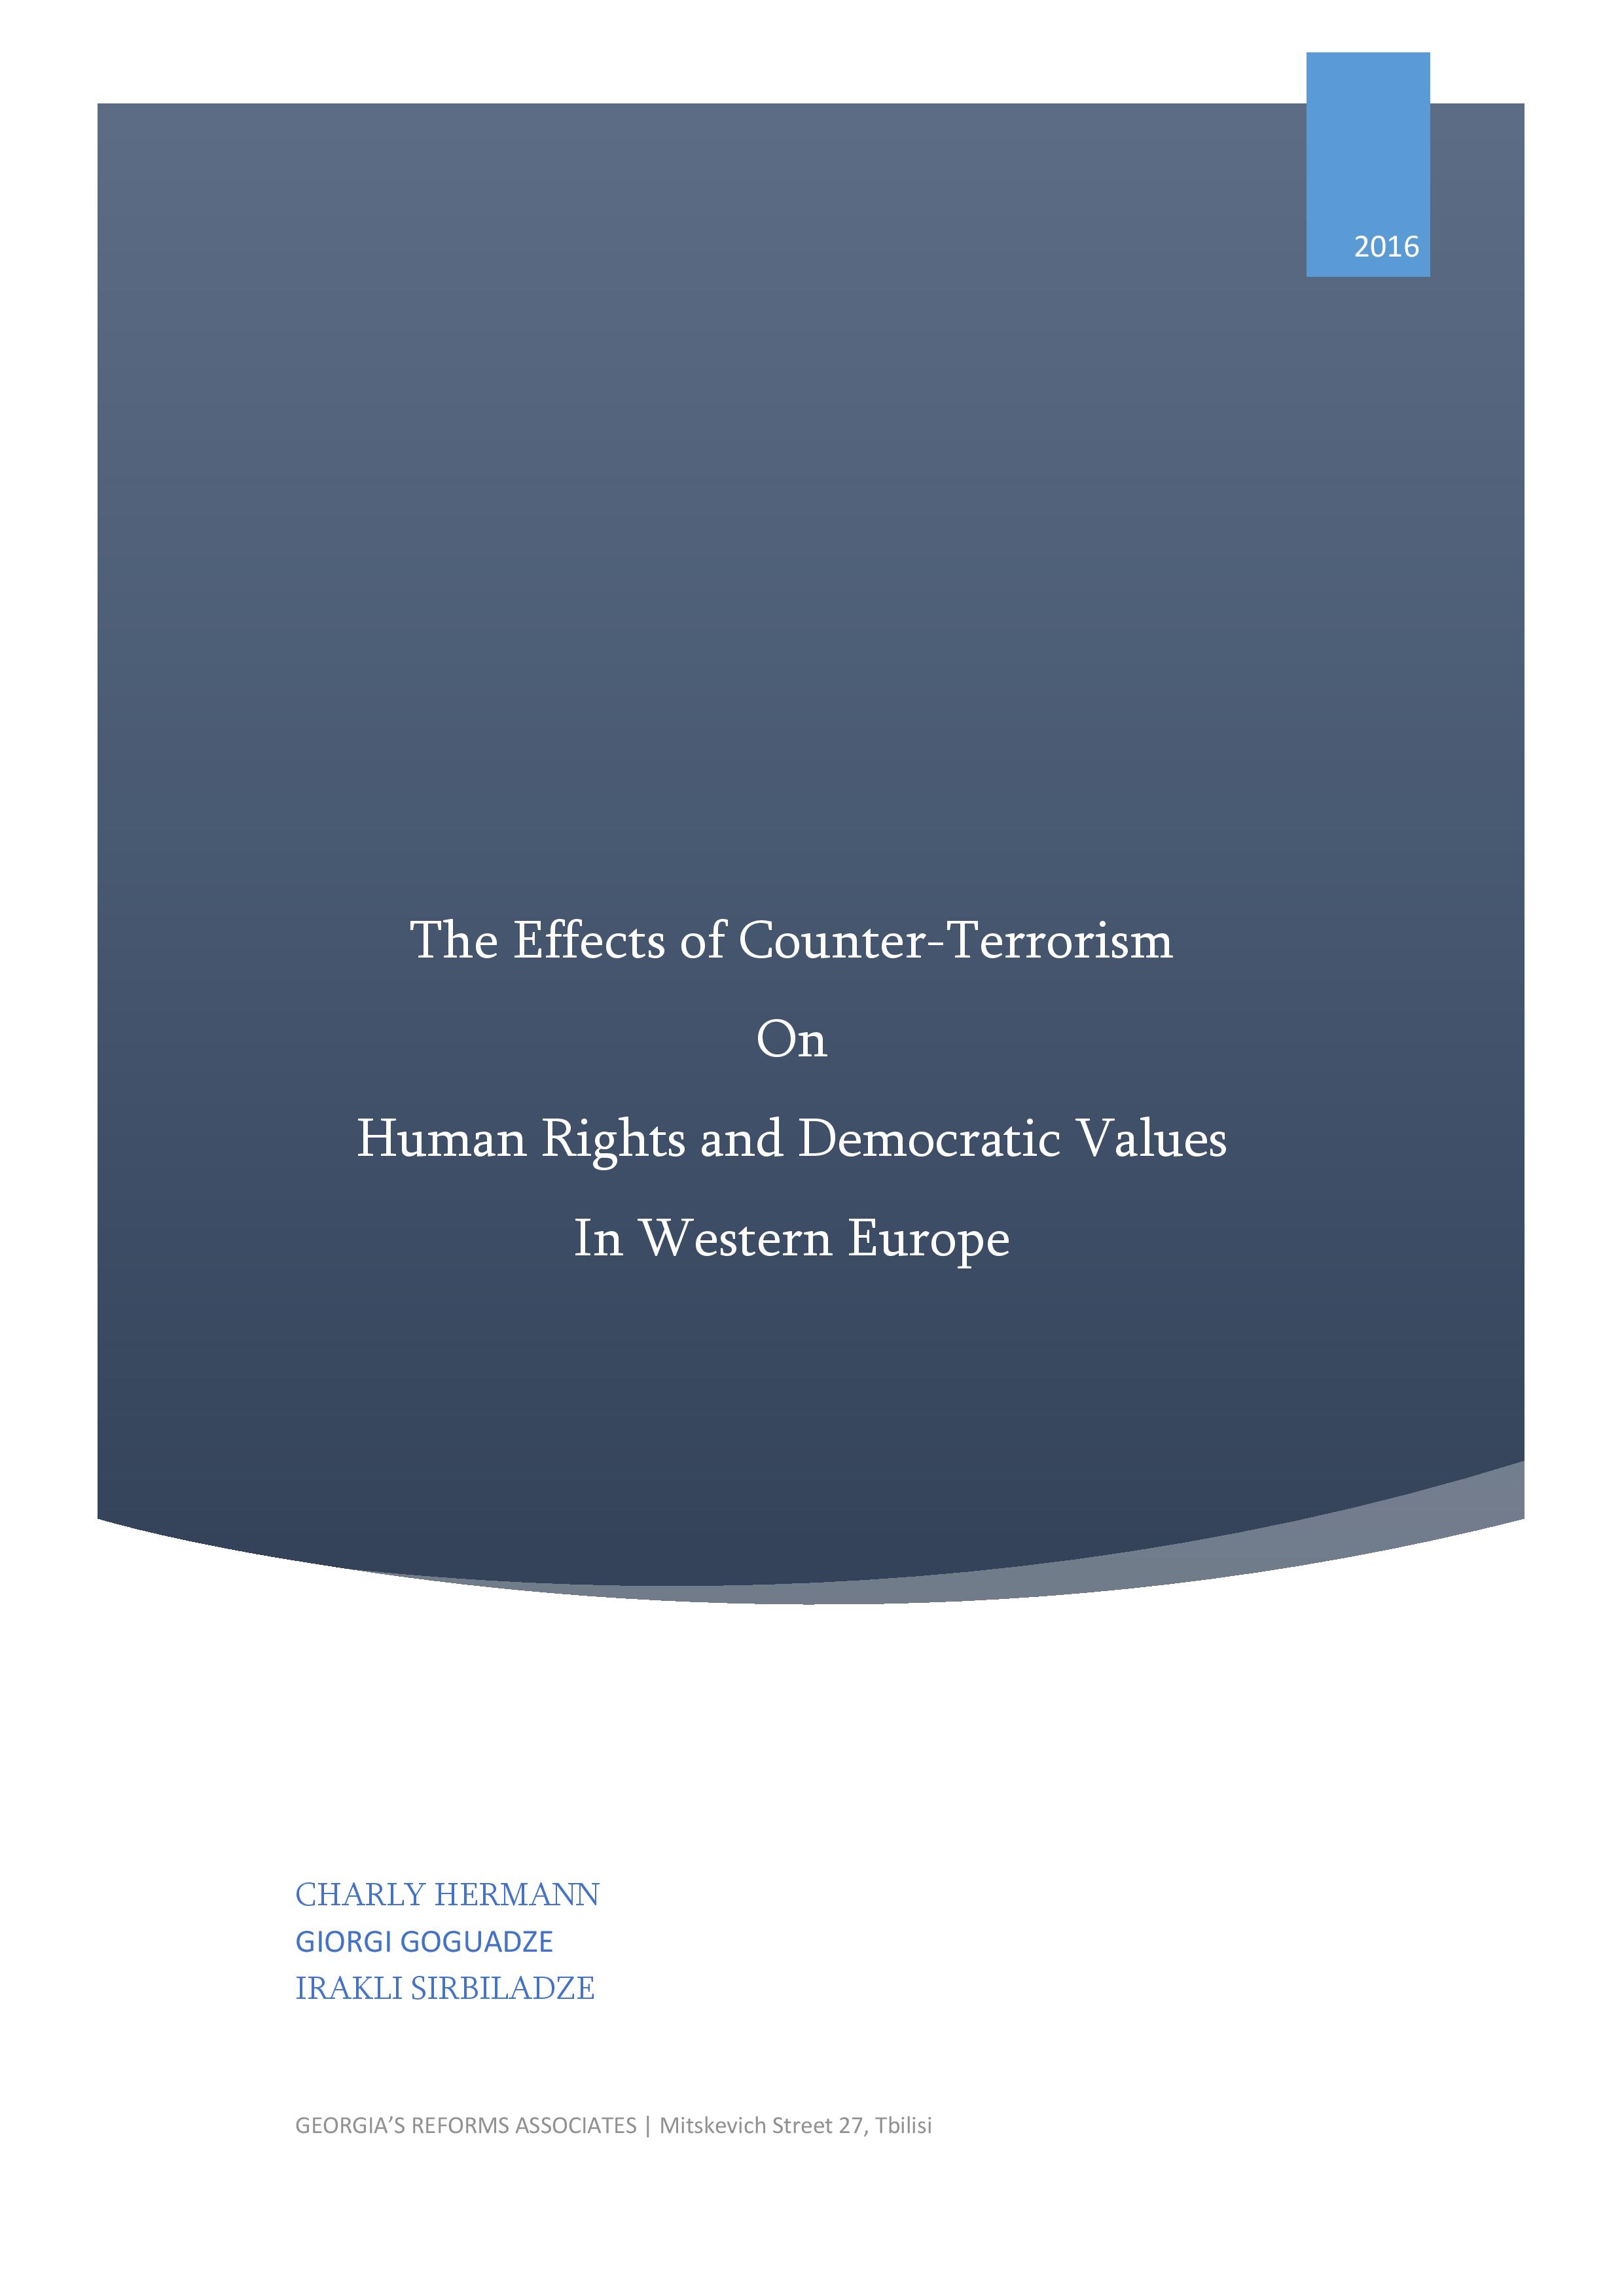 https://grass.org.ge/wp-content/uploads/2016/11/The-effects-of-counterterrorism-on-Human-Rights-final-page-001-1.jpg